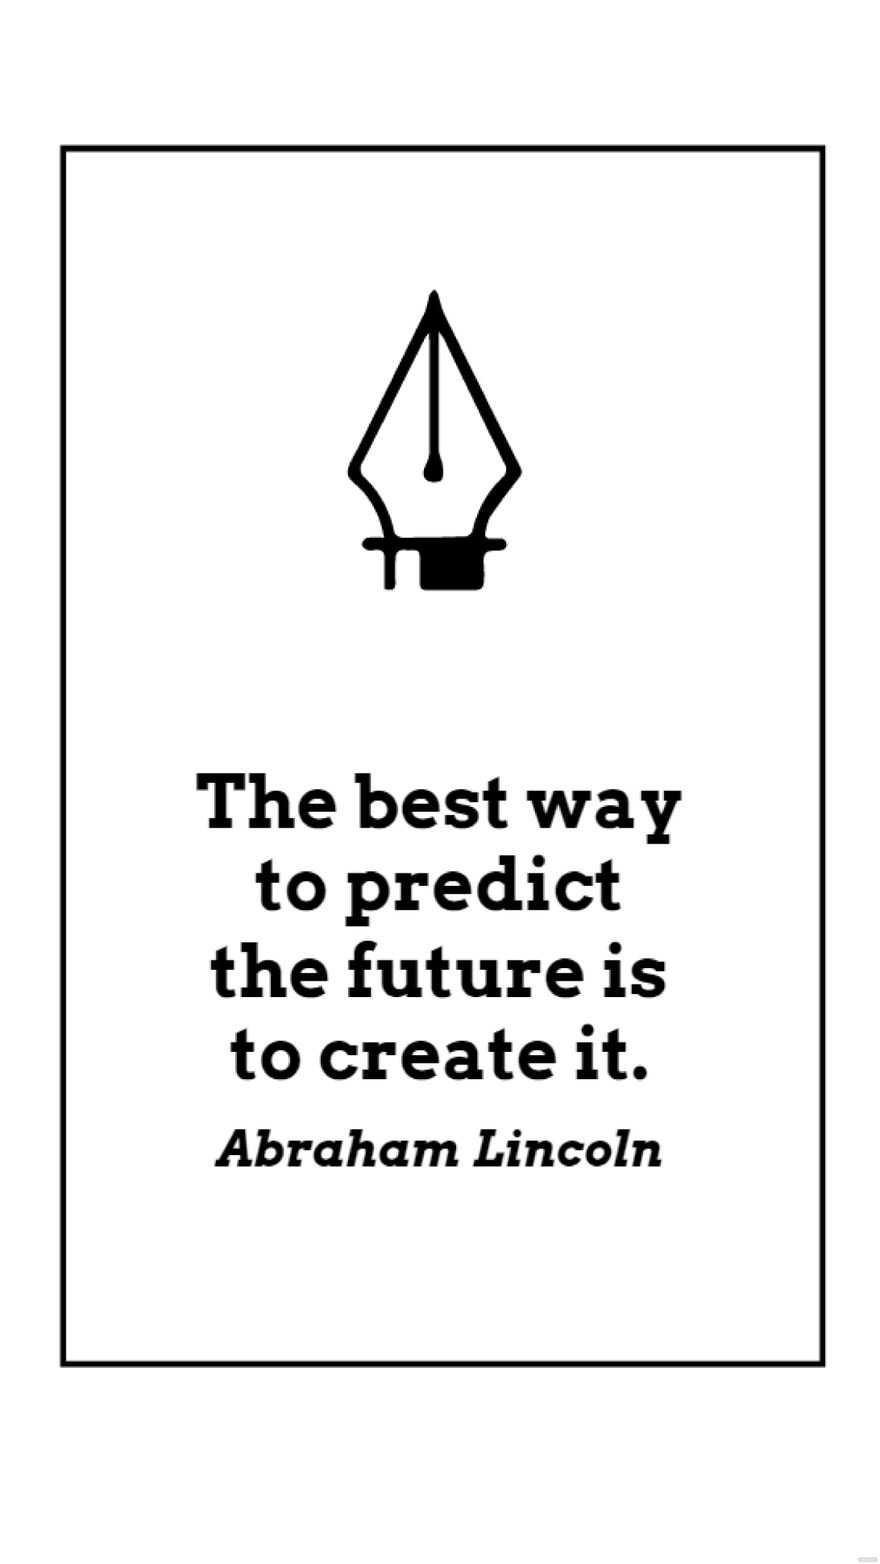 Abraham Lincoln - The best way to predict the future is to create it.